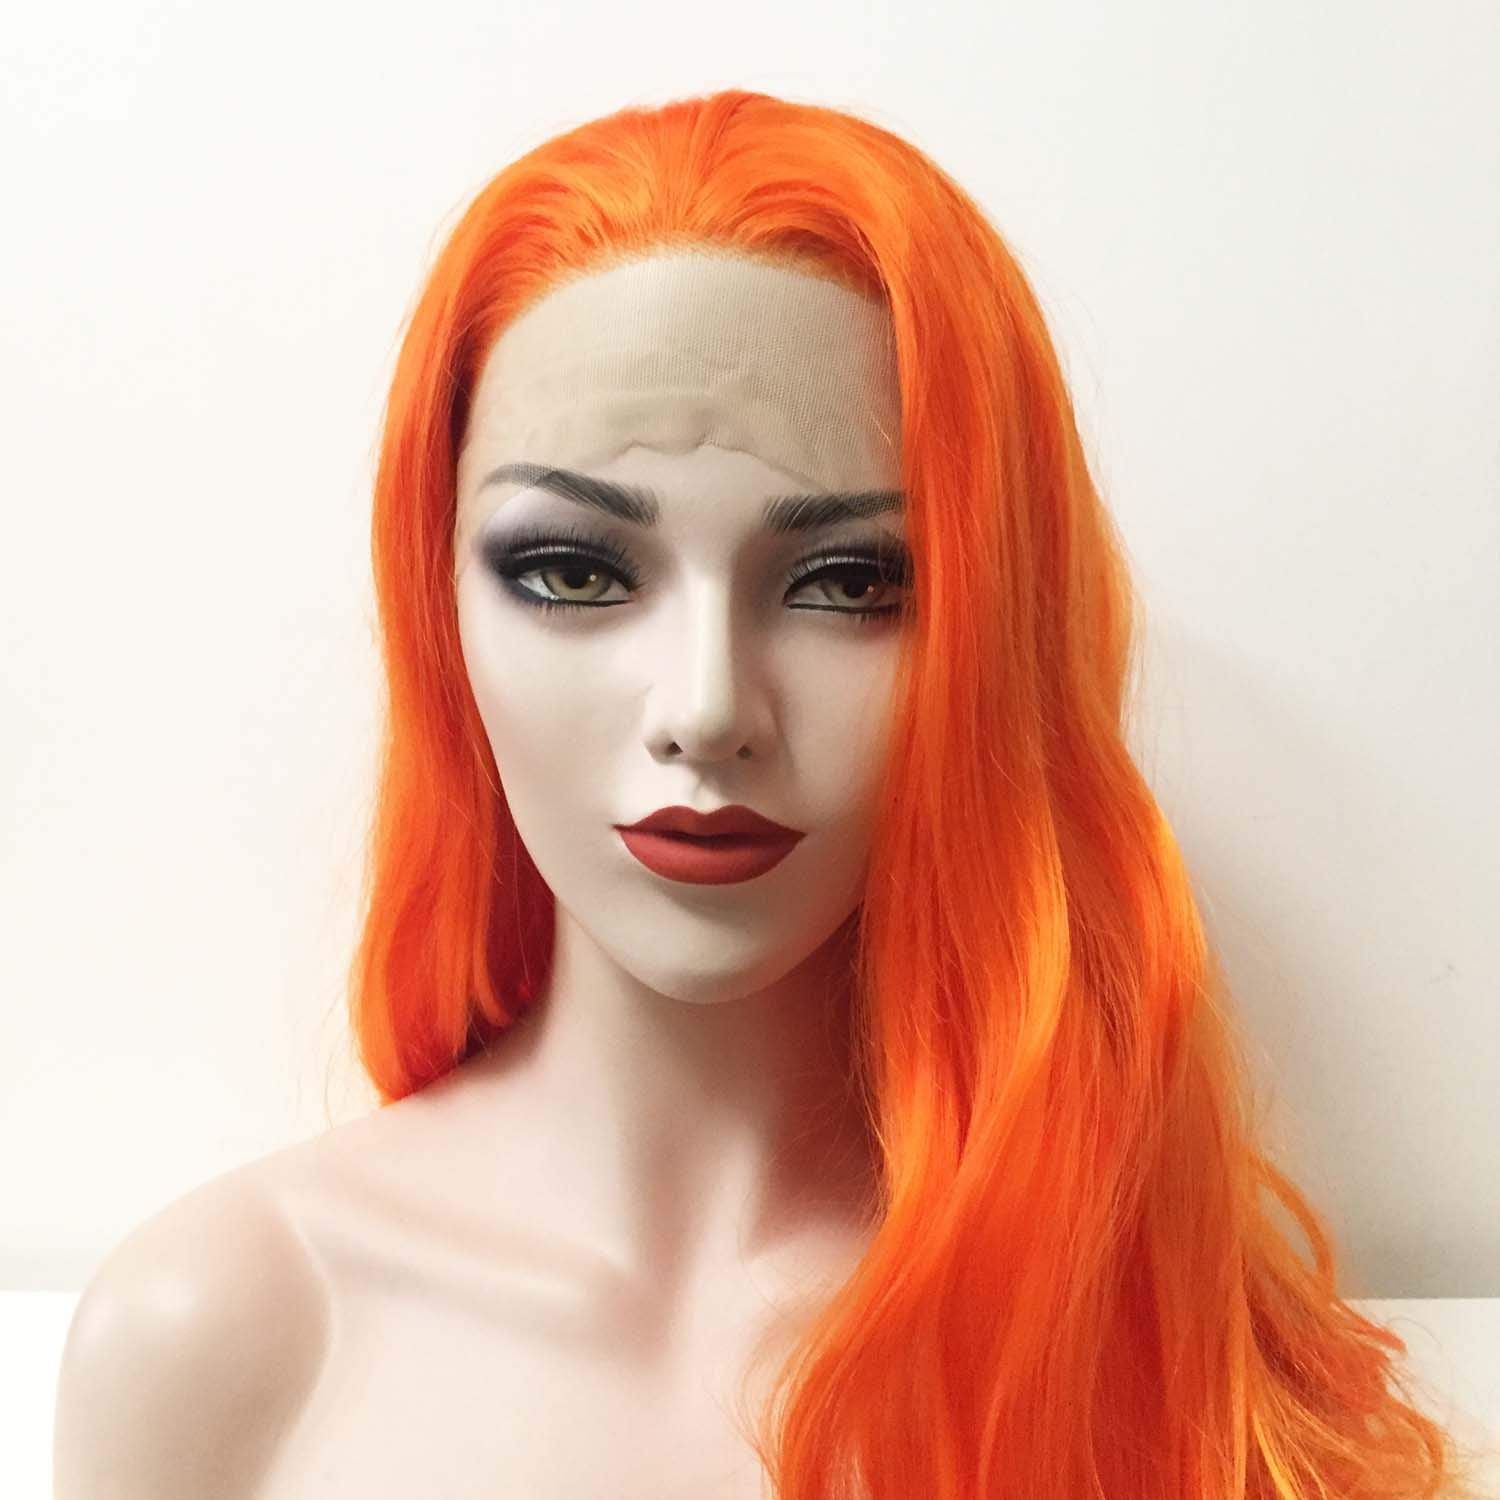 nevermindyrhead Women Lace Front Sharp Orange Free Parting Long Wavy Curly Thick Hair Wig